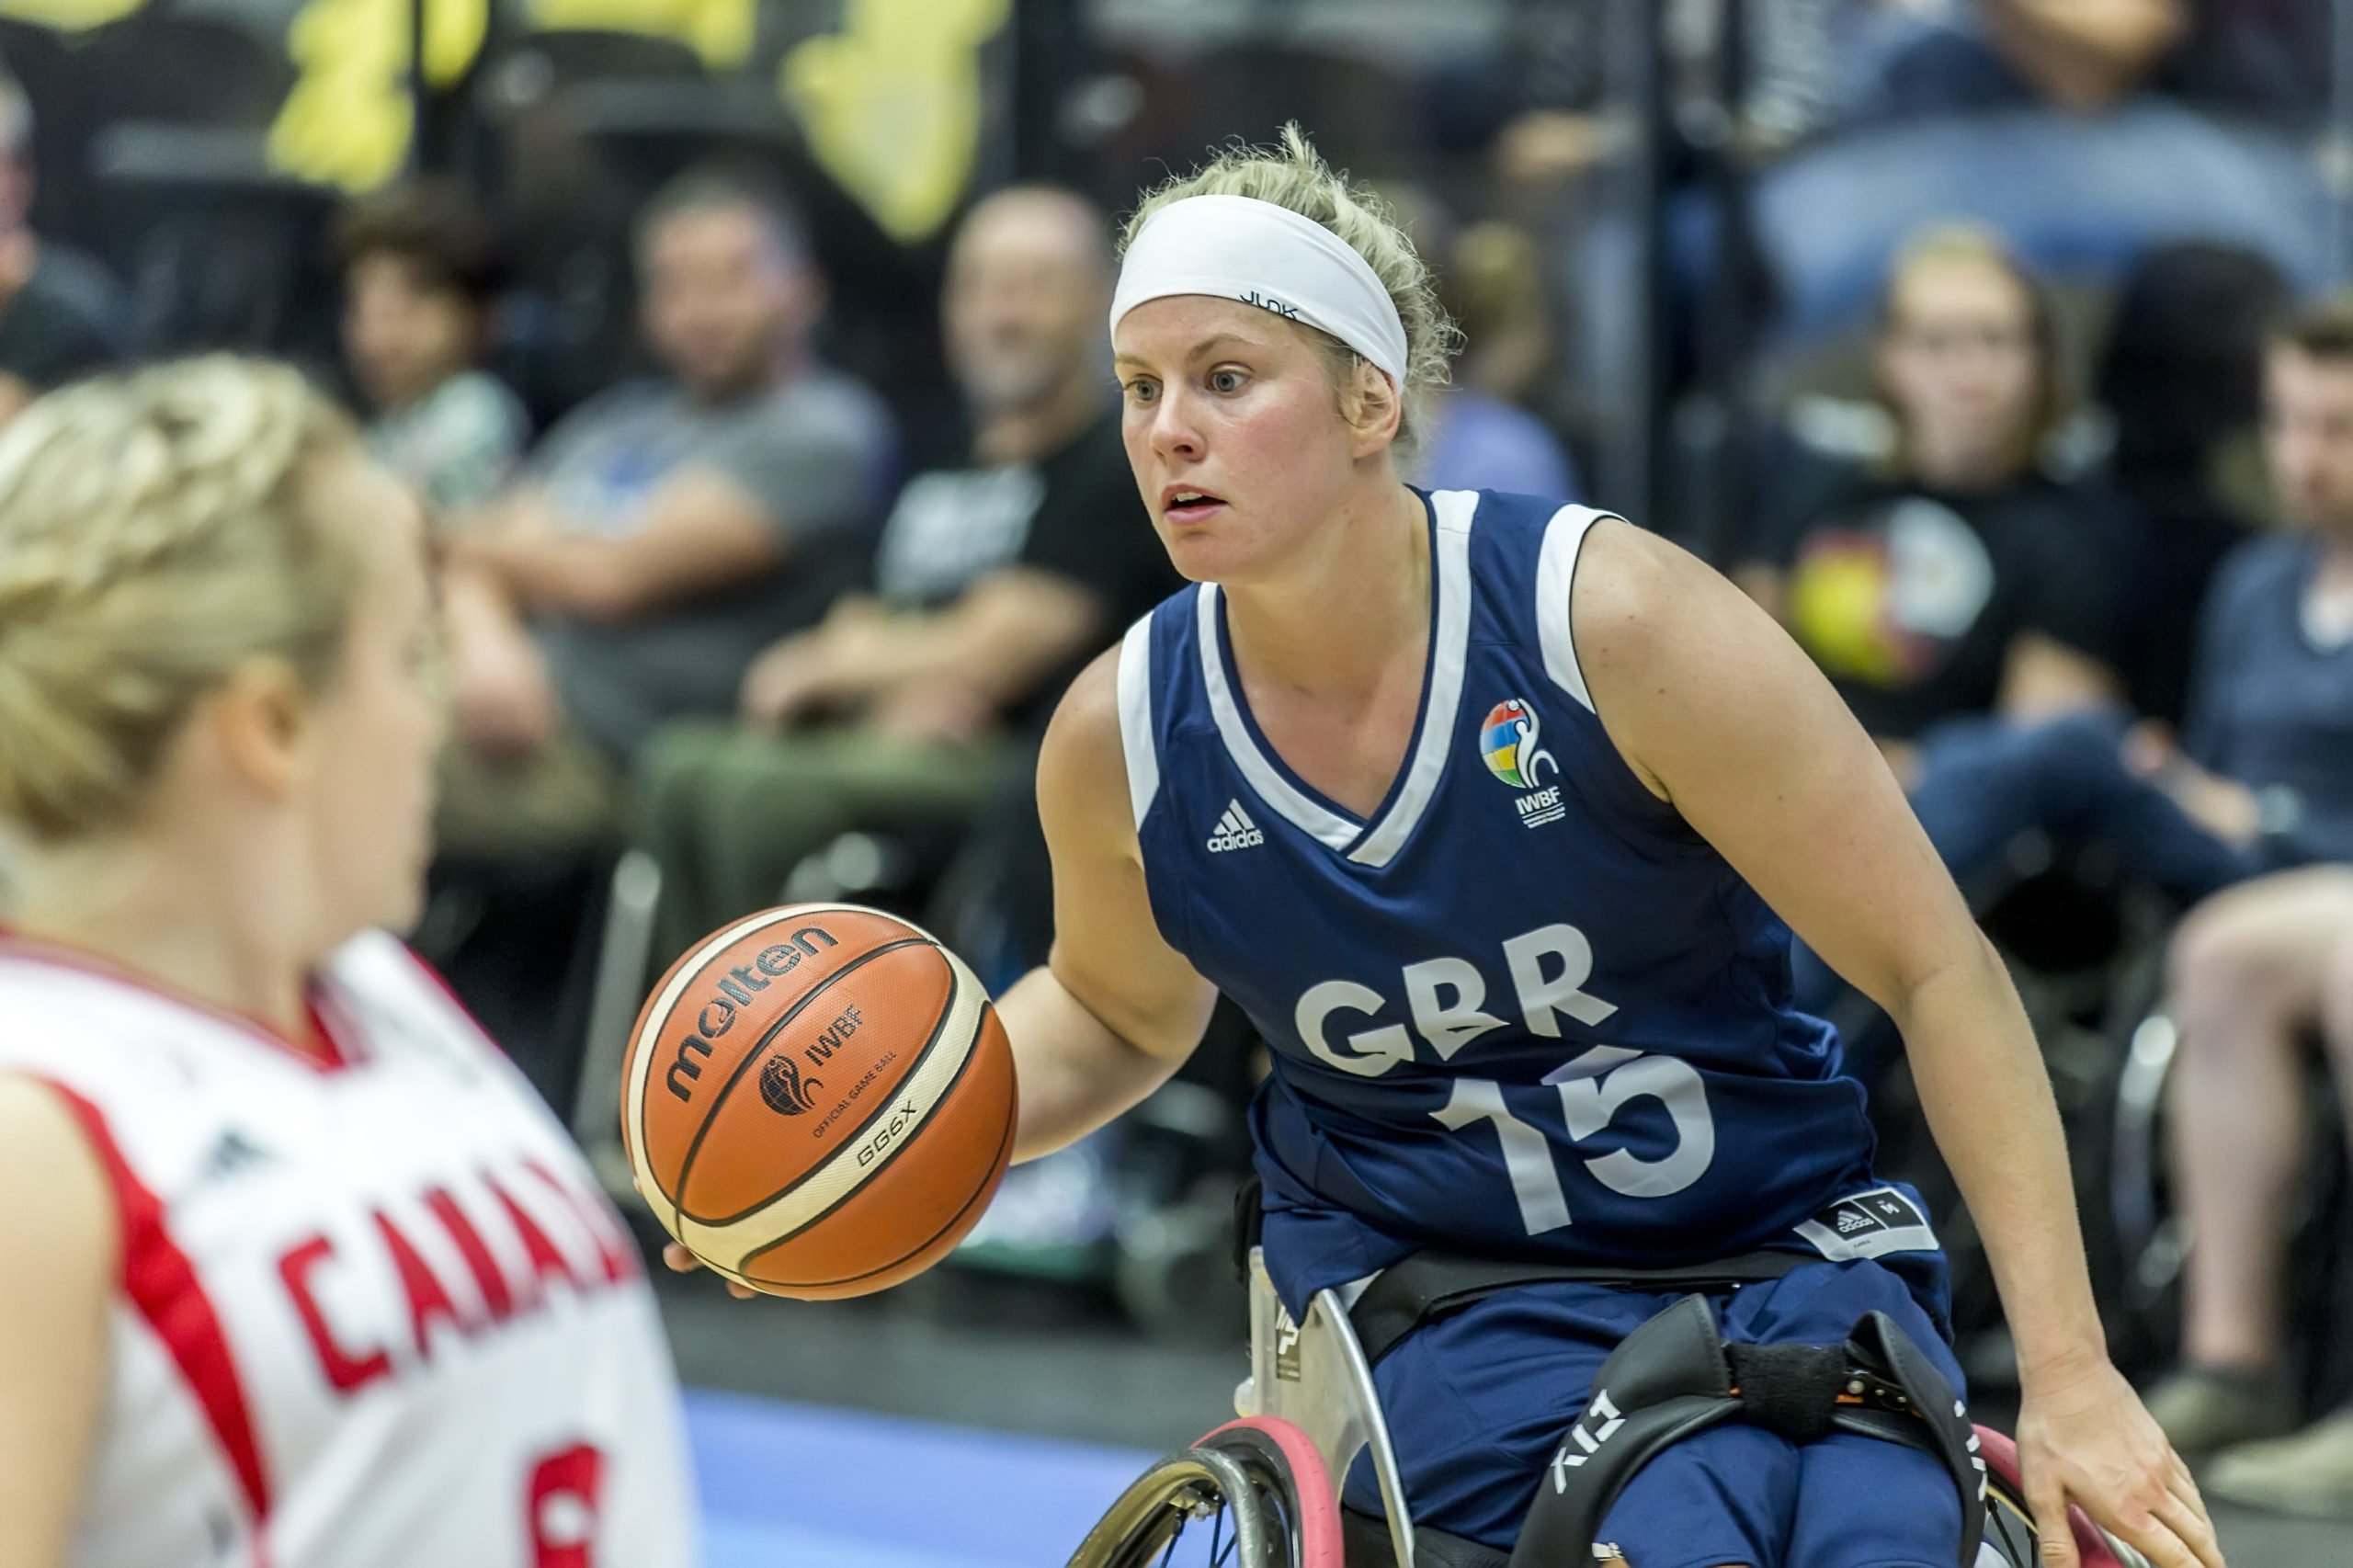 Robyn Love (GB): ‘Good opportunity for the women’s tournament to be its own entity’